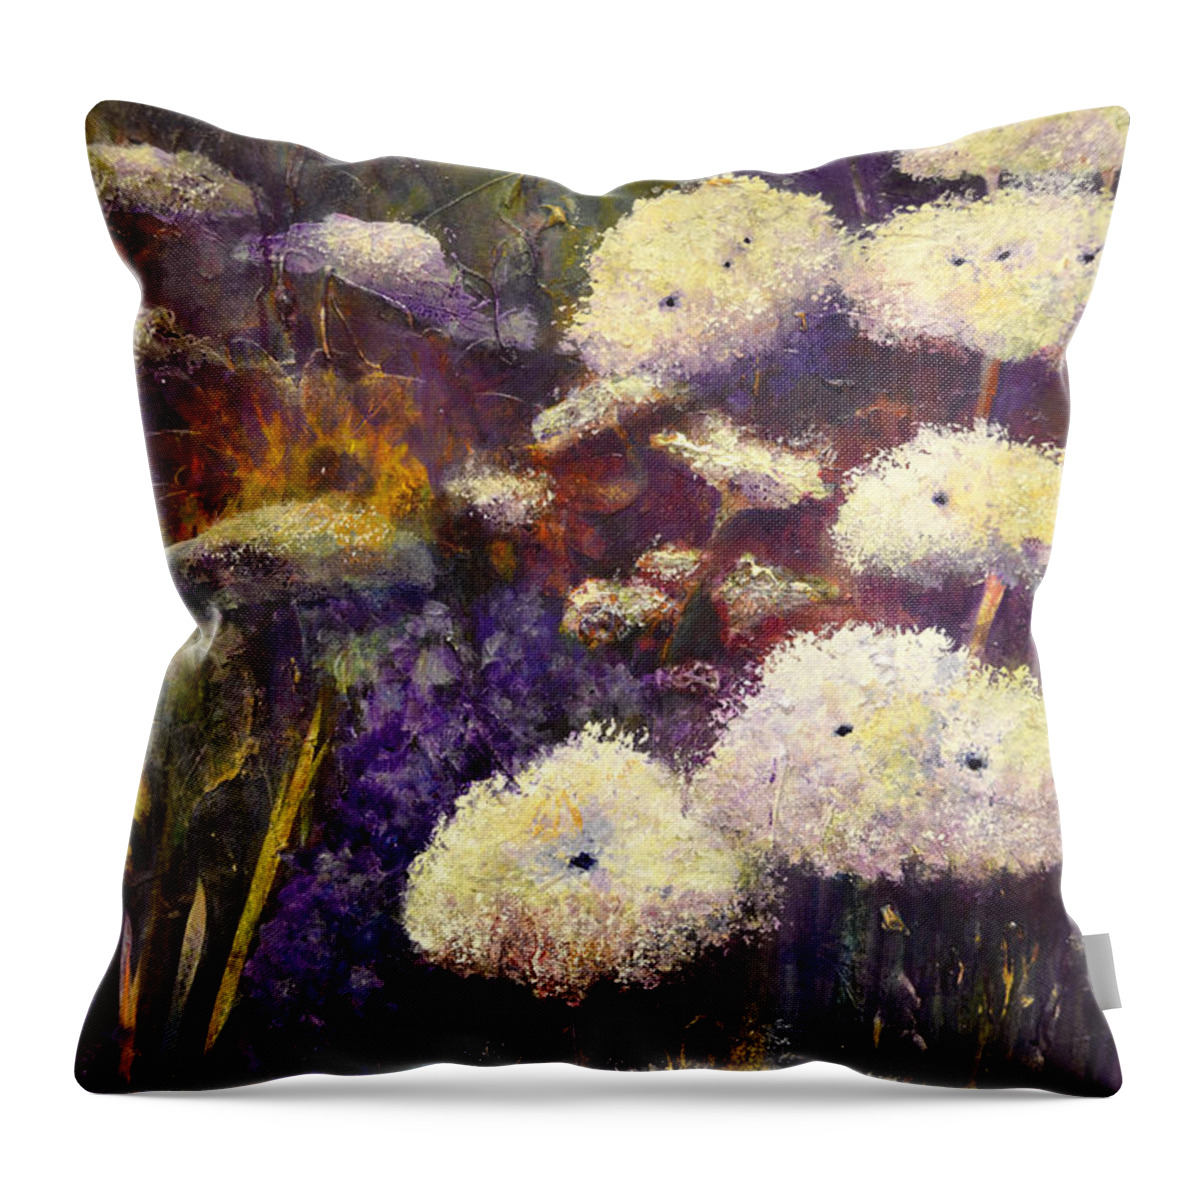 Queen Anne's Lace Throw Pillow featuring the painting Stand Tall by Claire Bull